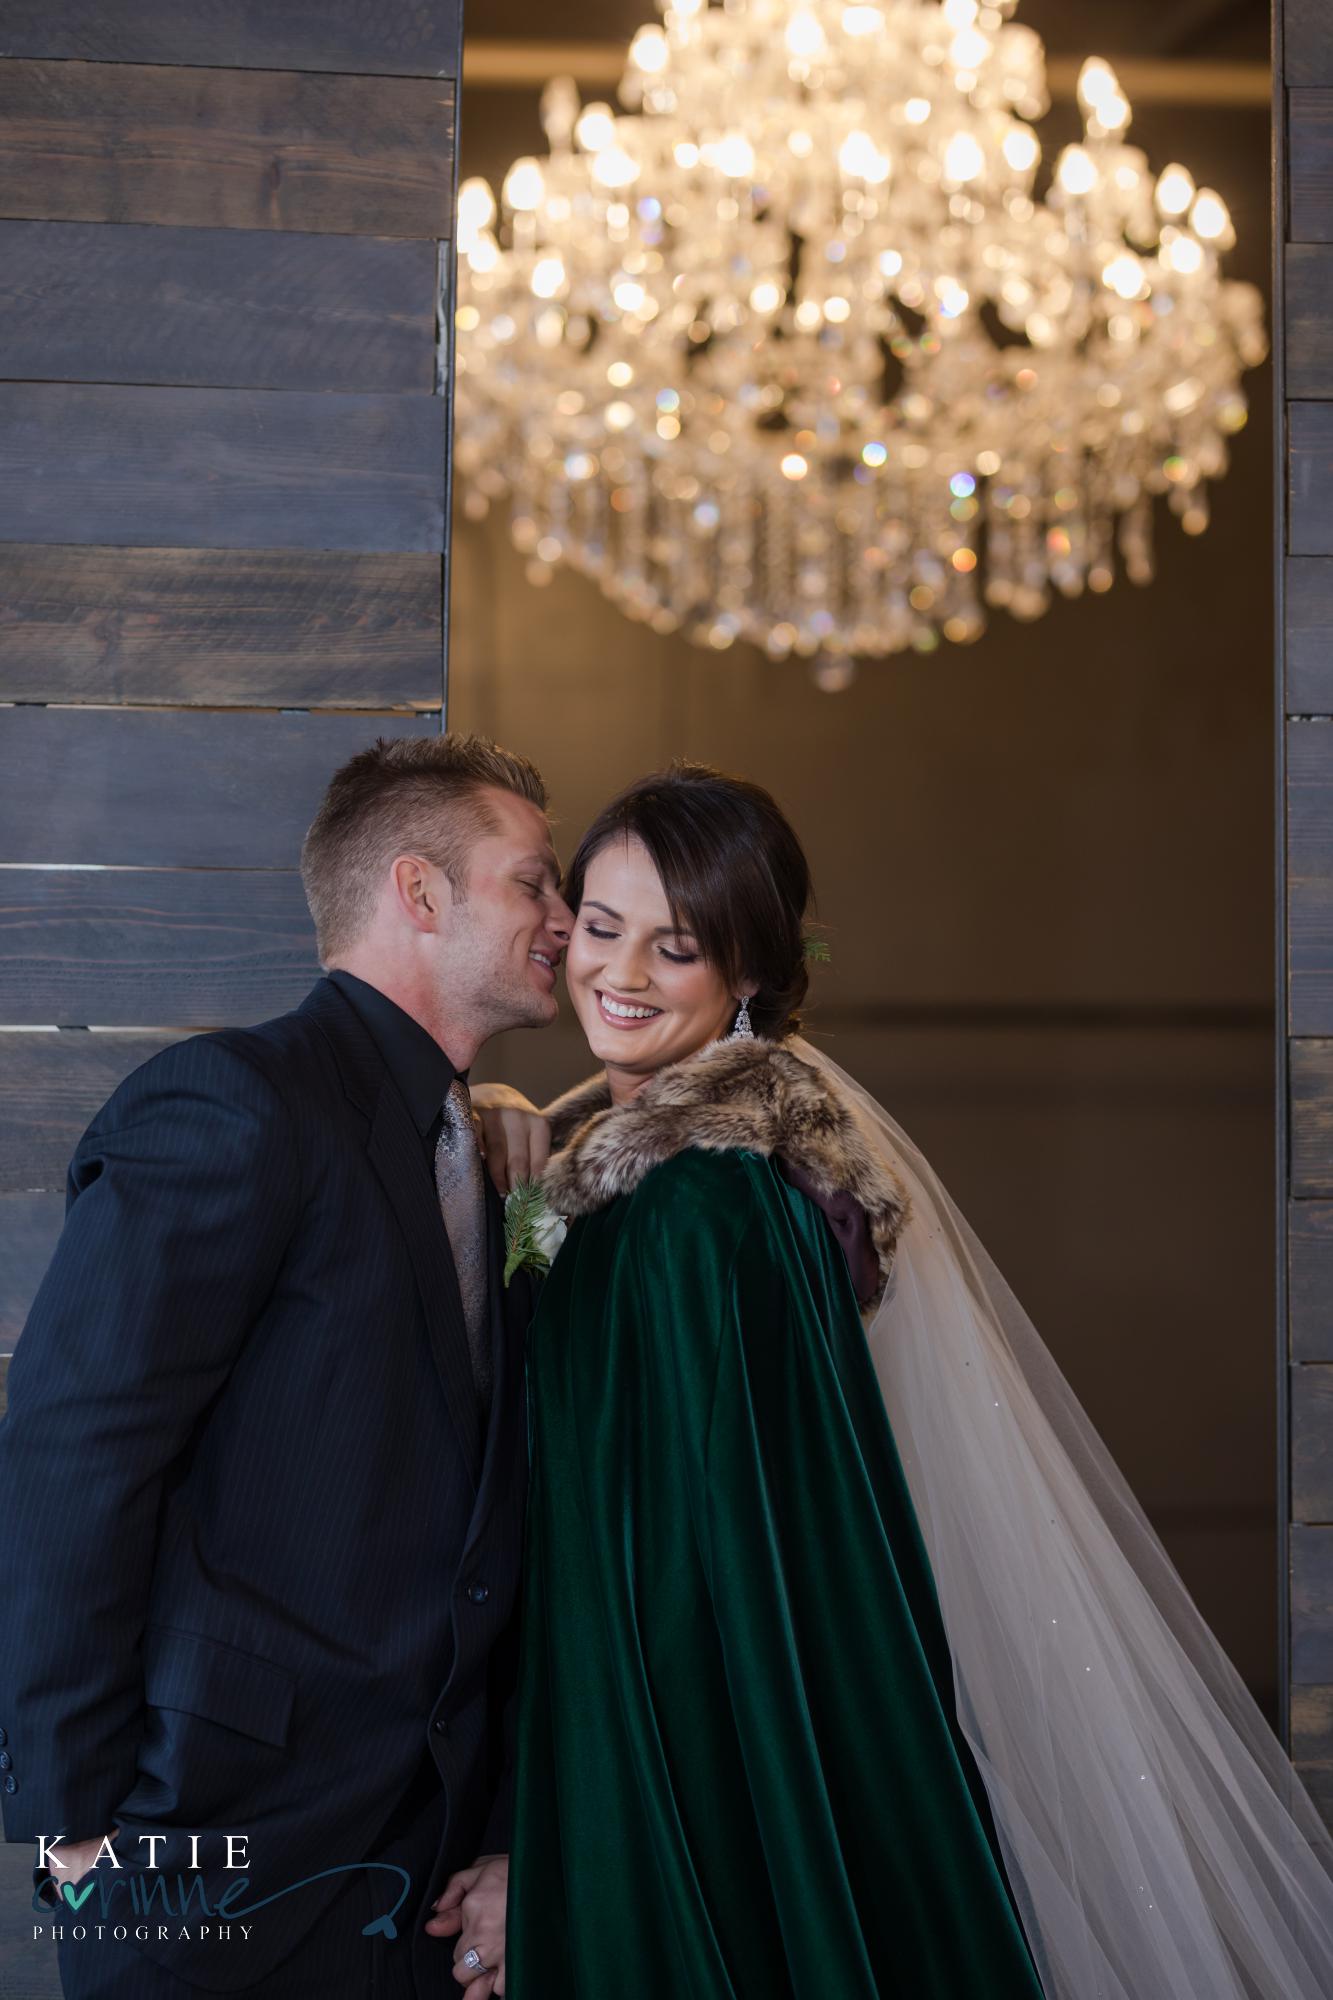 Colorado Winter Wedding couple pose playfully with bride wearing green fur cape